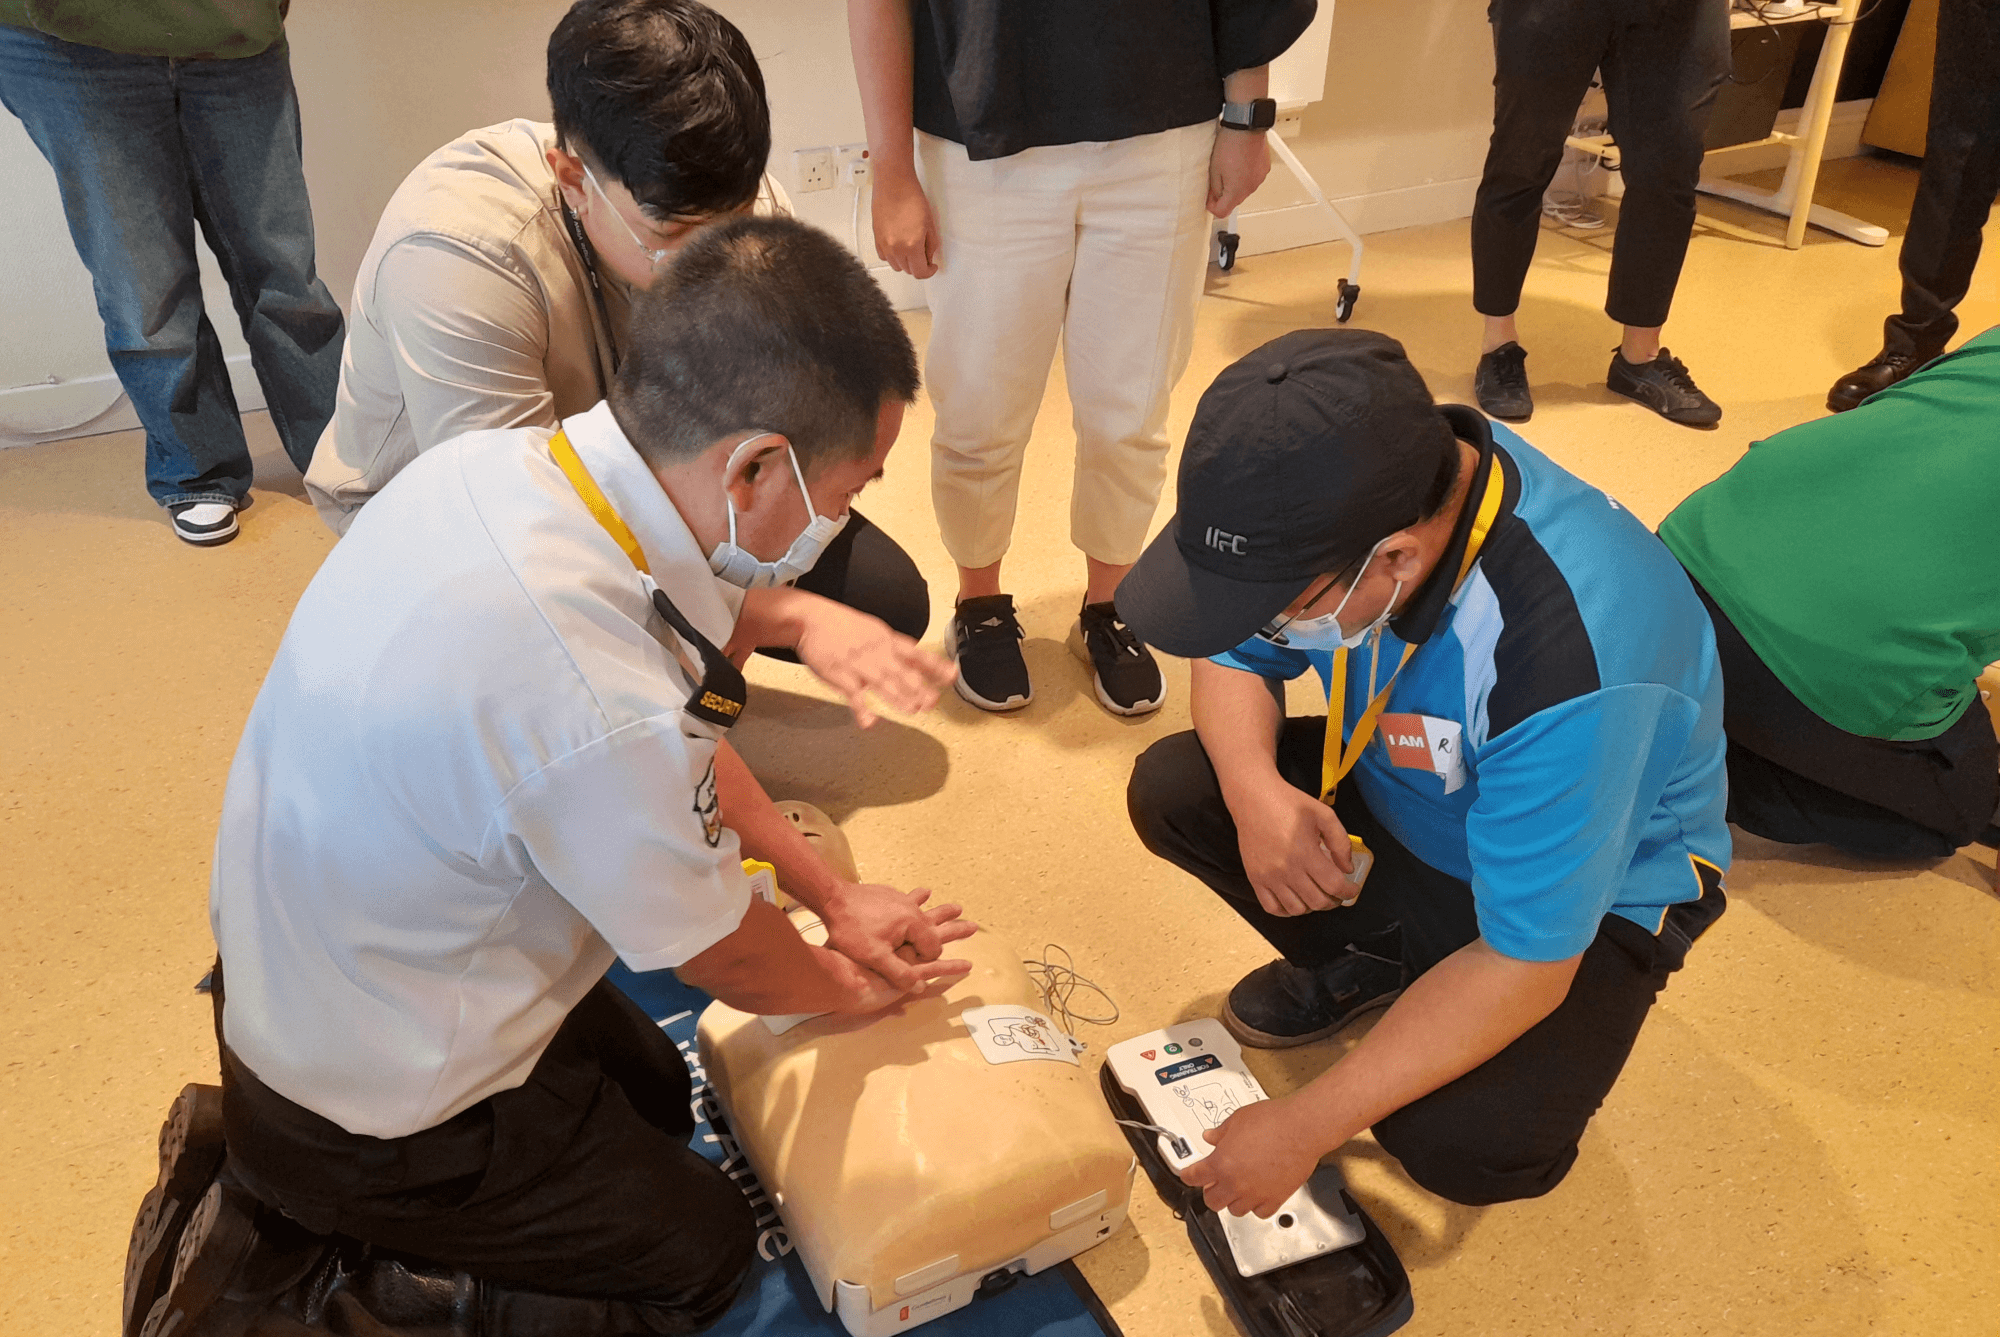 Basic Occupational First Aid, CPR & AED Training at ASEC